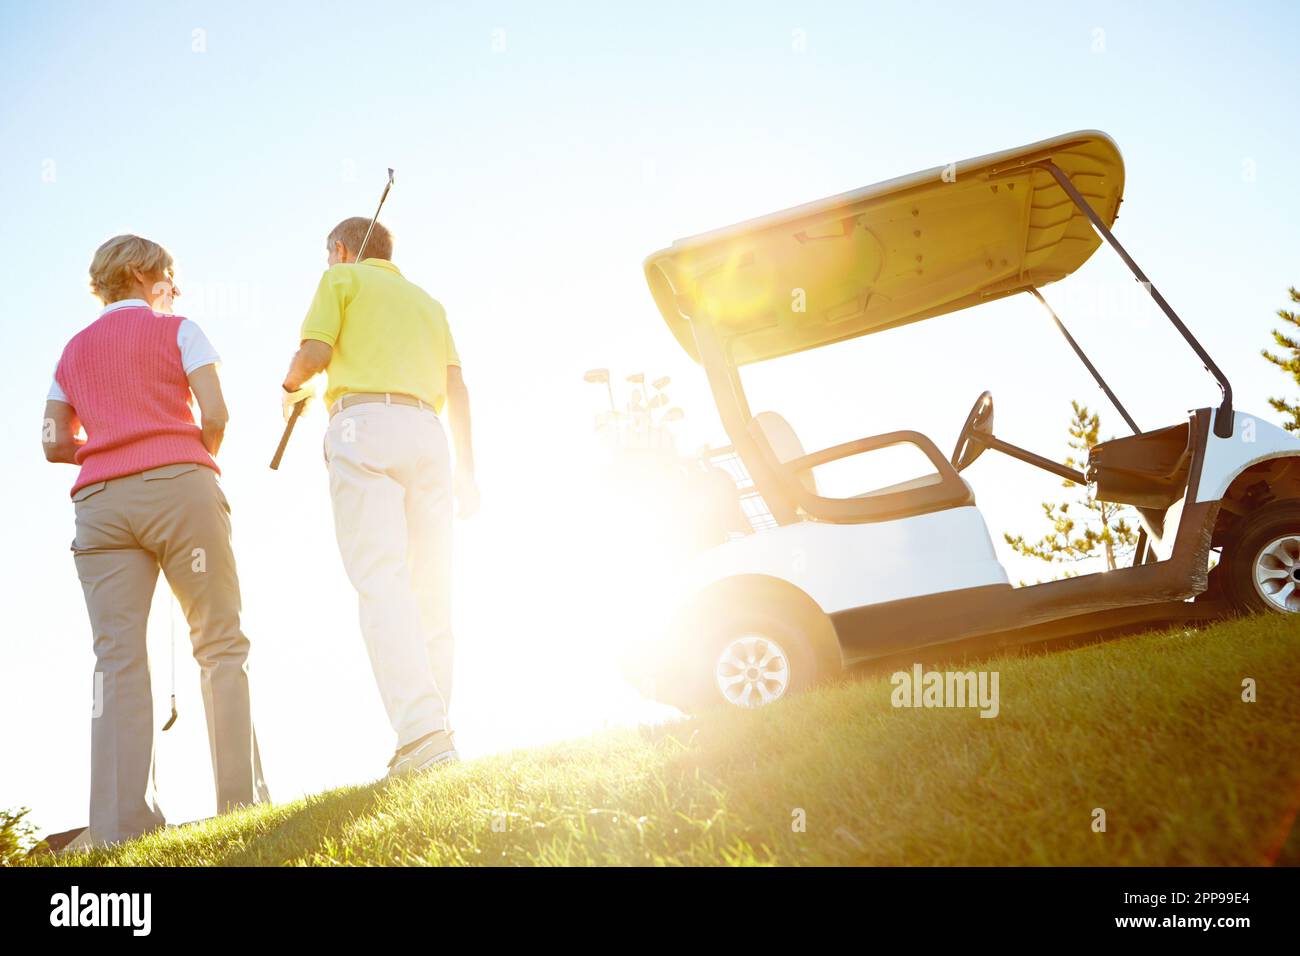 Walking off into the sunset. Rear view shot of an elderly couple walking to their golf cart. Stock Photo